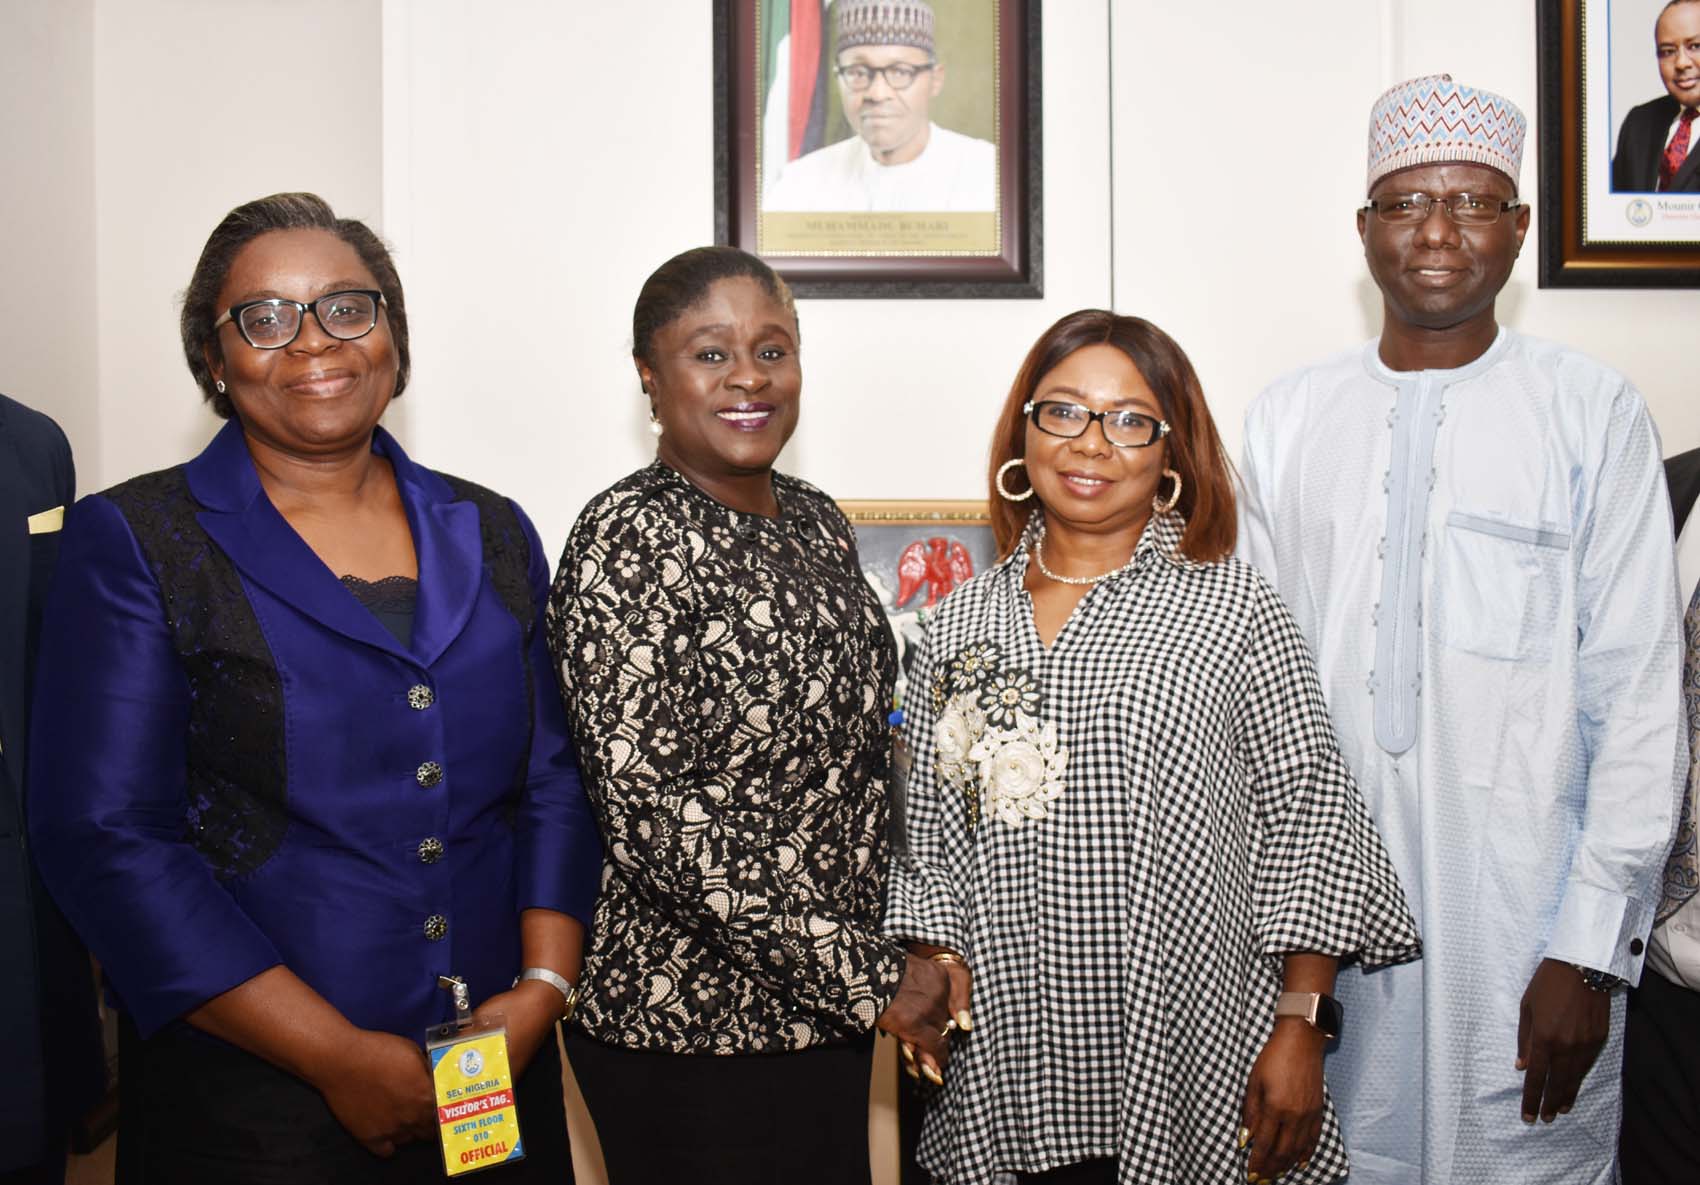  L-R,  Managing Director, UTL Trust Management Service, Mrs Olufunke Oluseyi, President, Association of Corporate Trustees Mrs Tokunbo Ajayi, Acting Director General, Securities and Exchange Commission, Ms Mary Uduk and  Acting Executive Commissioner, Operations, SEC Mr Isyaku Tilde during a Meeting between SEC and Association of Corporate Trustees in Abuja, Wednesday